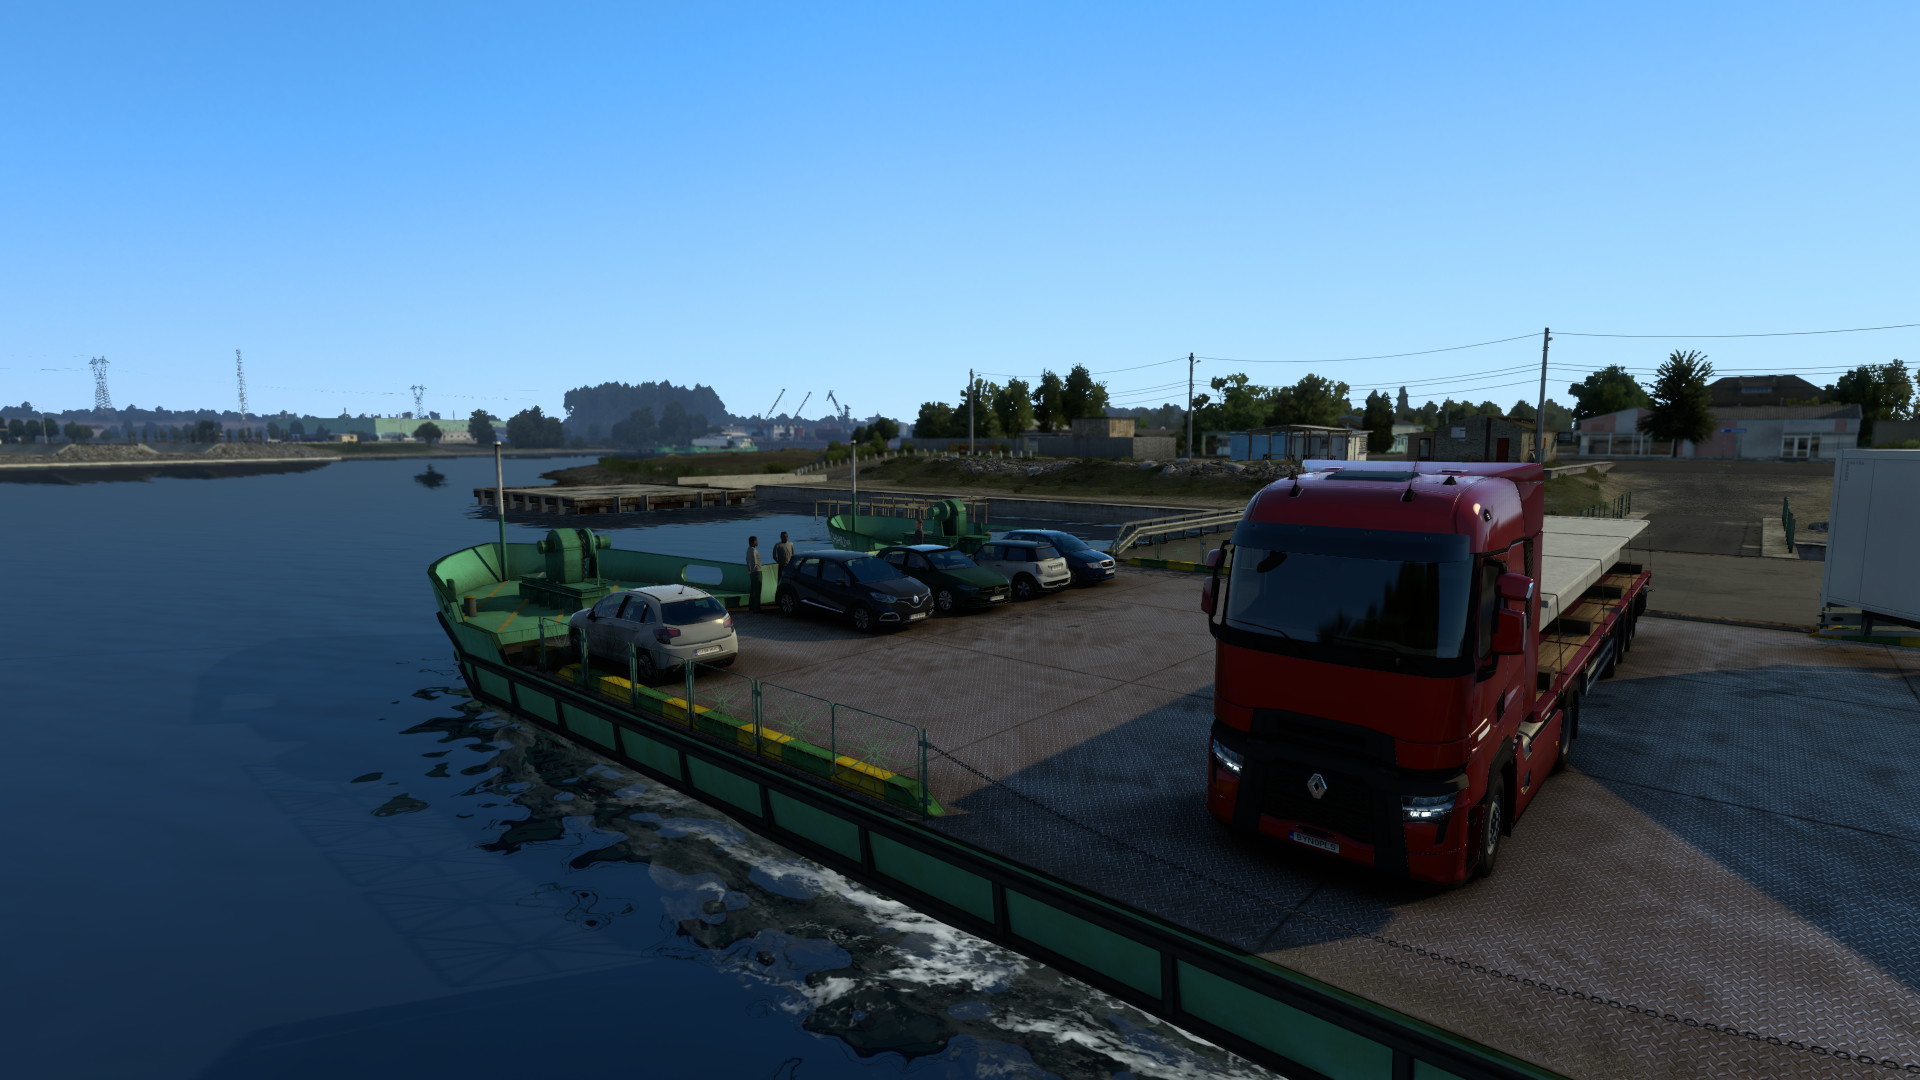 ets2_20210409_231343_00.png